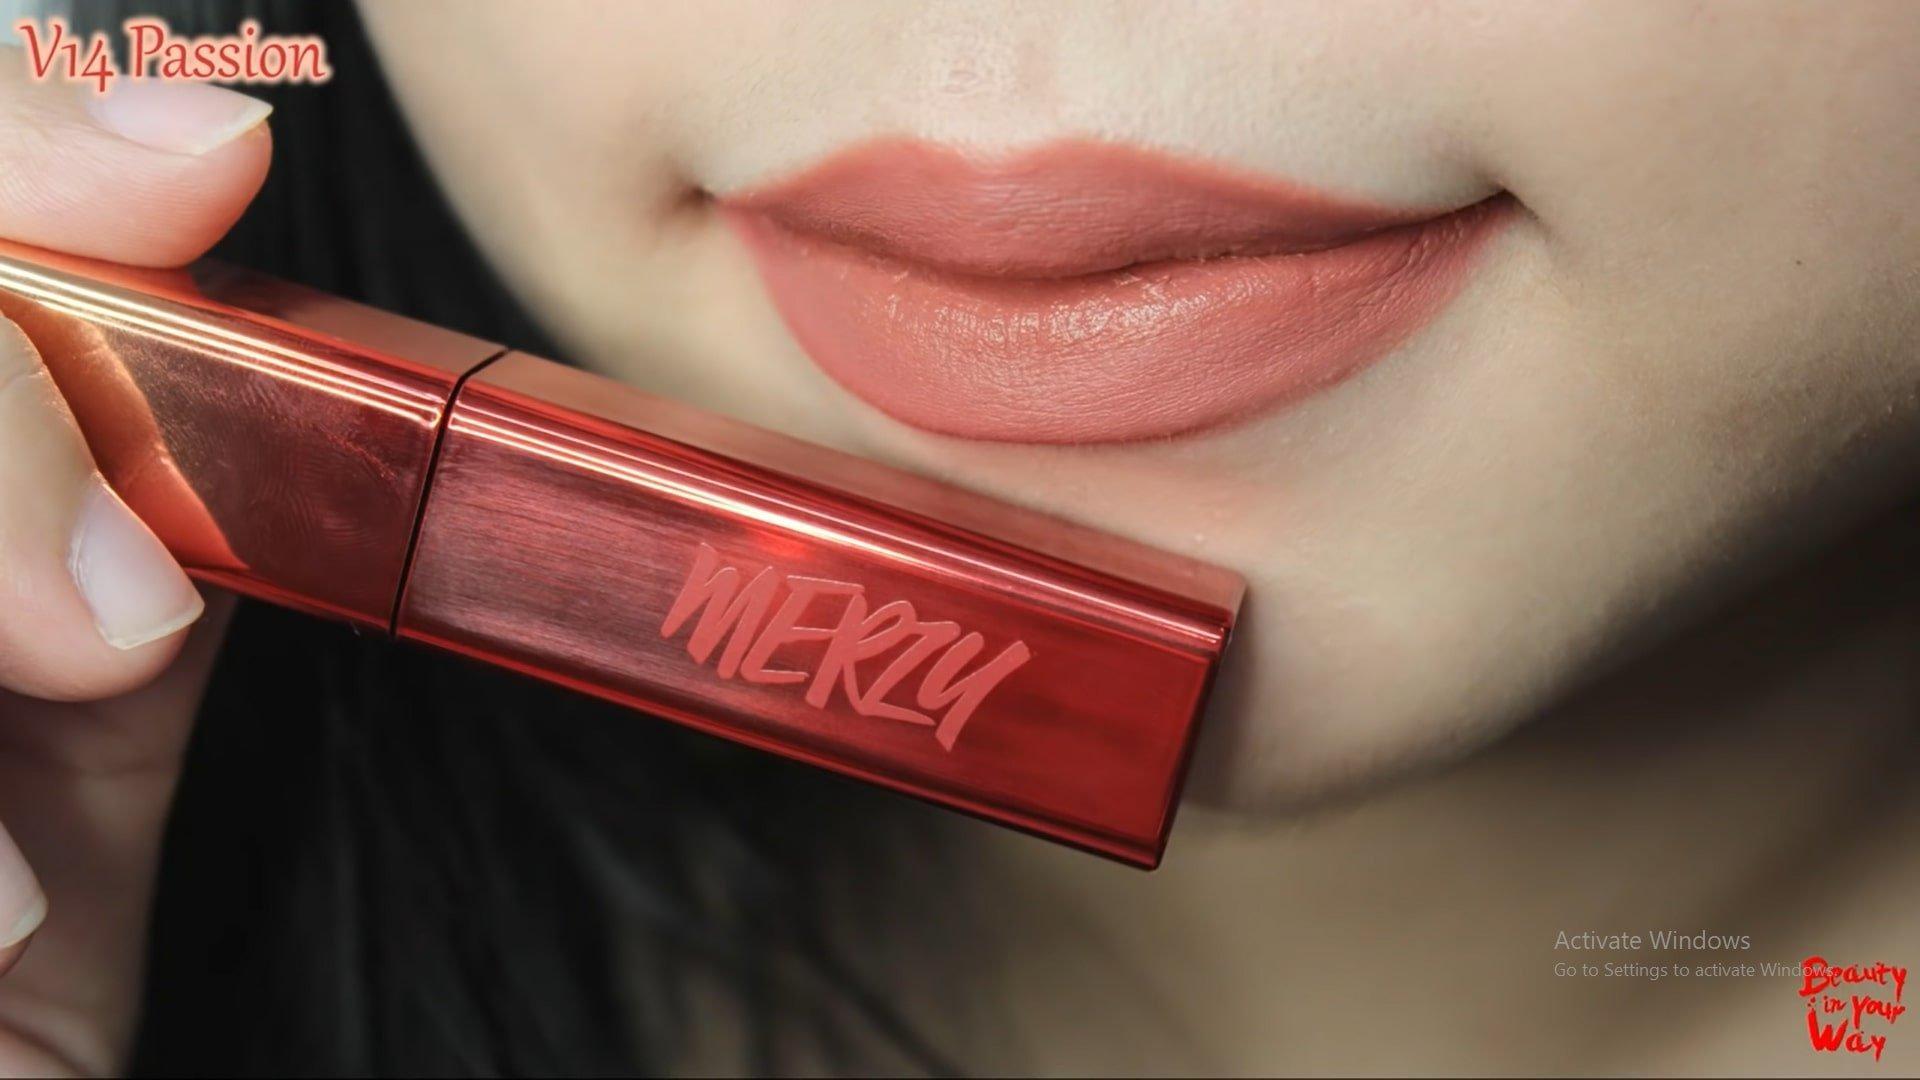 Review Son Merzy Velvet Tint Season 3 Colors Of Youth